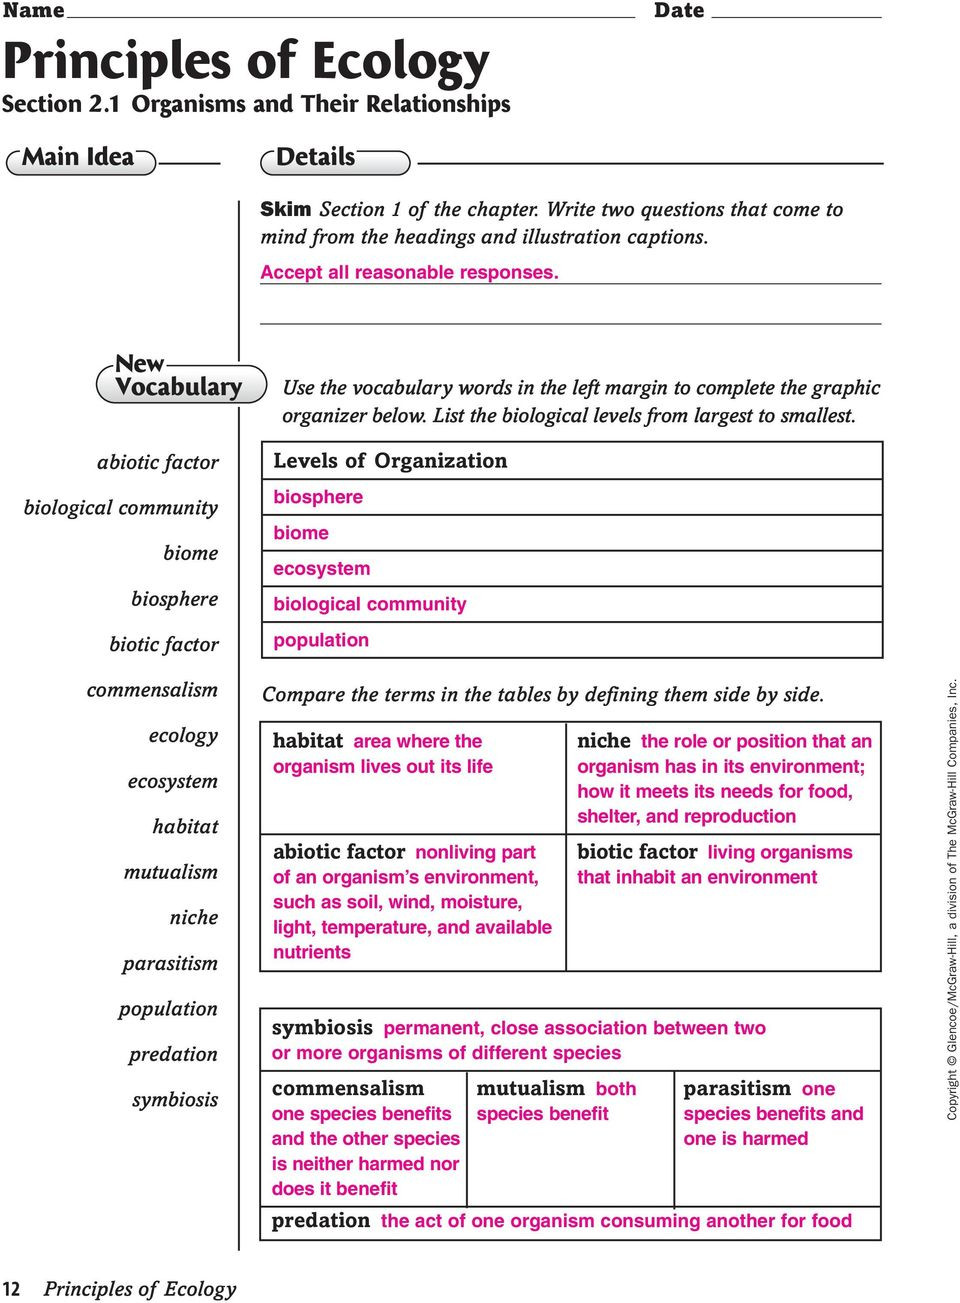 Principles Of Ecology Worksheet Answers 30 Chapter 3 Principles Ecology Worksheet Answers